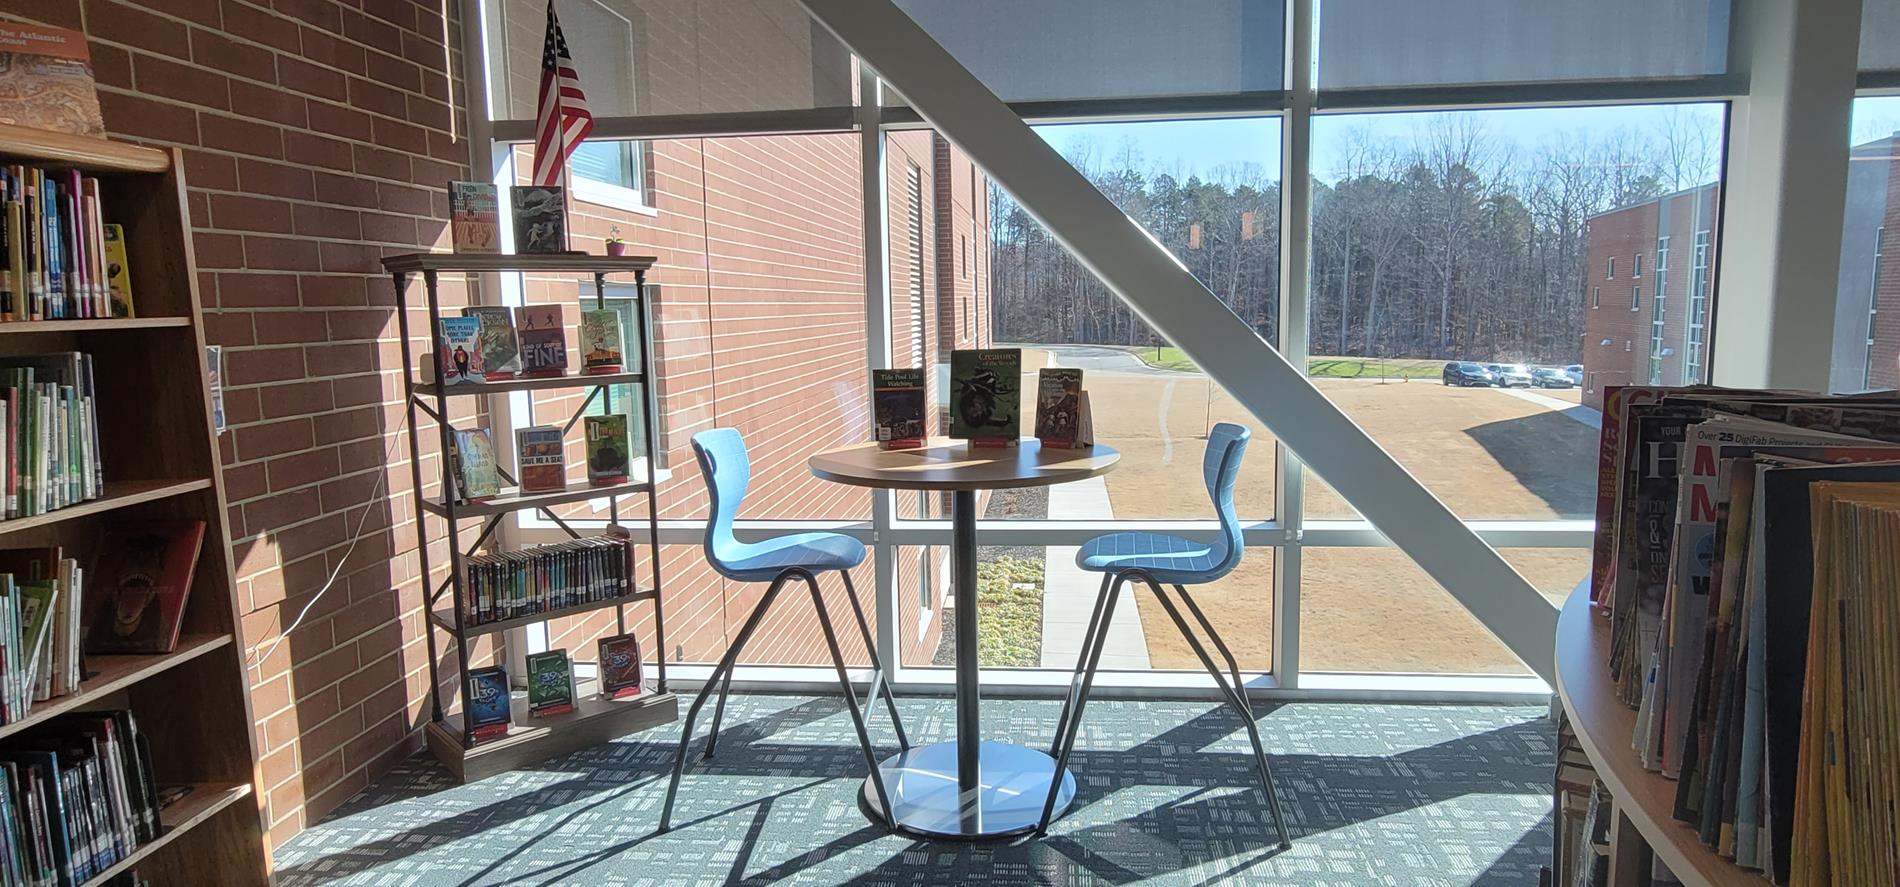 One corner of the Media Center where you can find a new book, sit at a cafe table and look at the beautiful view.